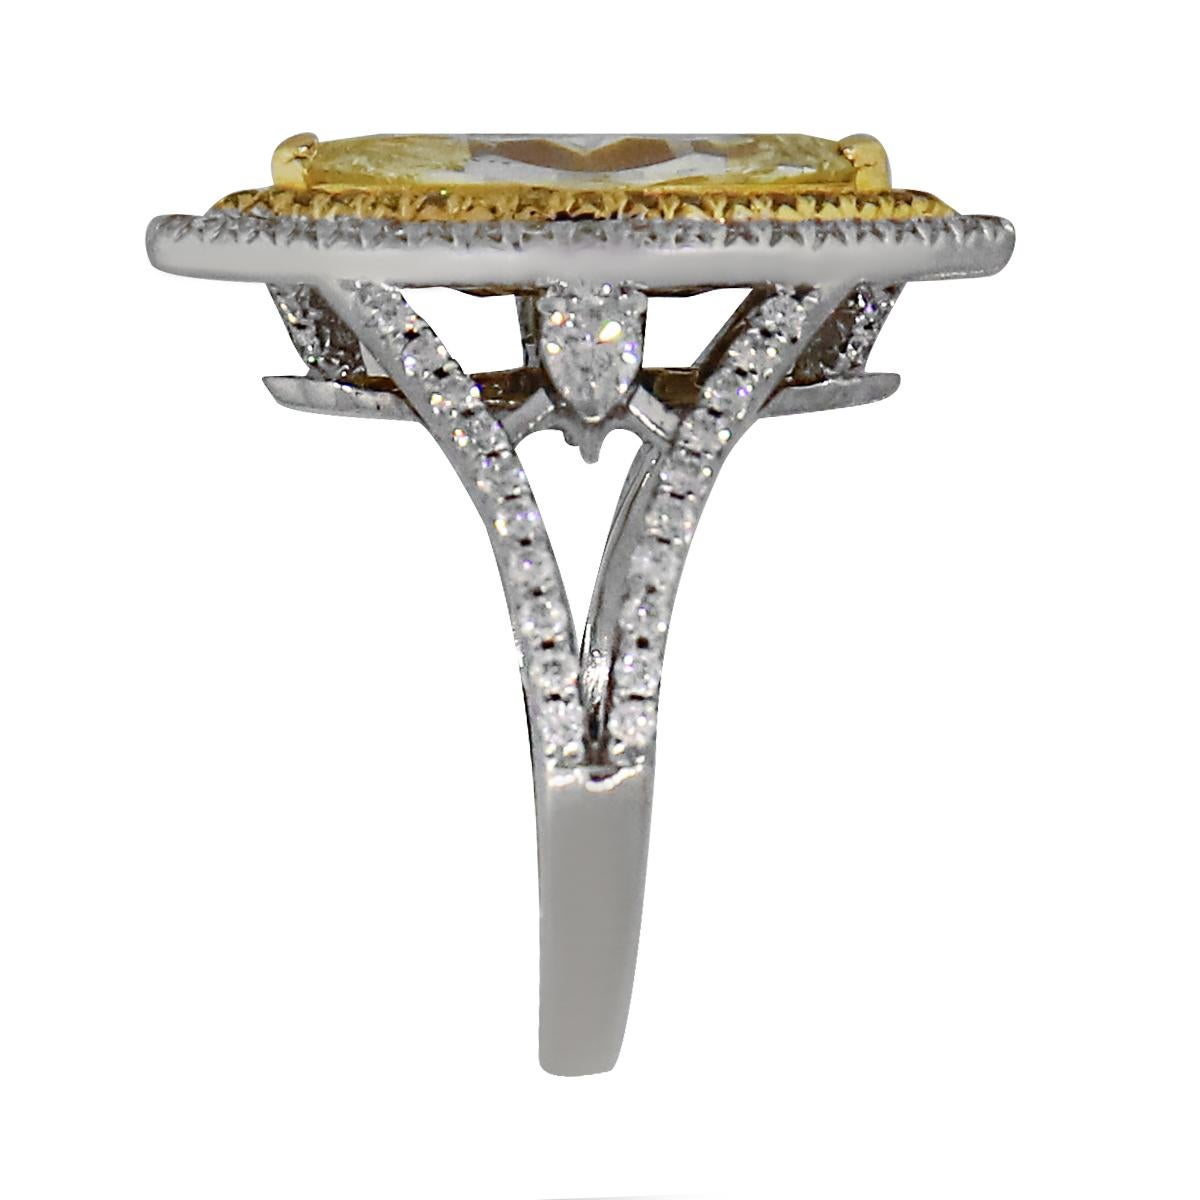 Material: 18k White Gold and 18k Yellow Gold
Center Diamond Details: Approximately 2.01ct Fancy yellow marquise cut diamond. 
Accent Diamond Details: Approximately 0.76ctw white round brilliant and yellow enhanced diamonds. Diamonds are G/H in color